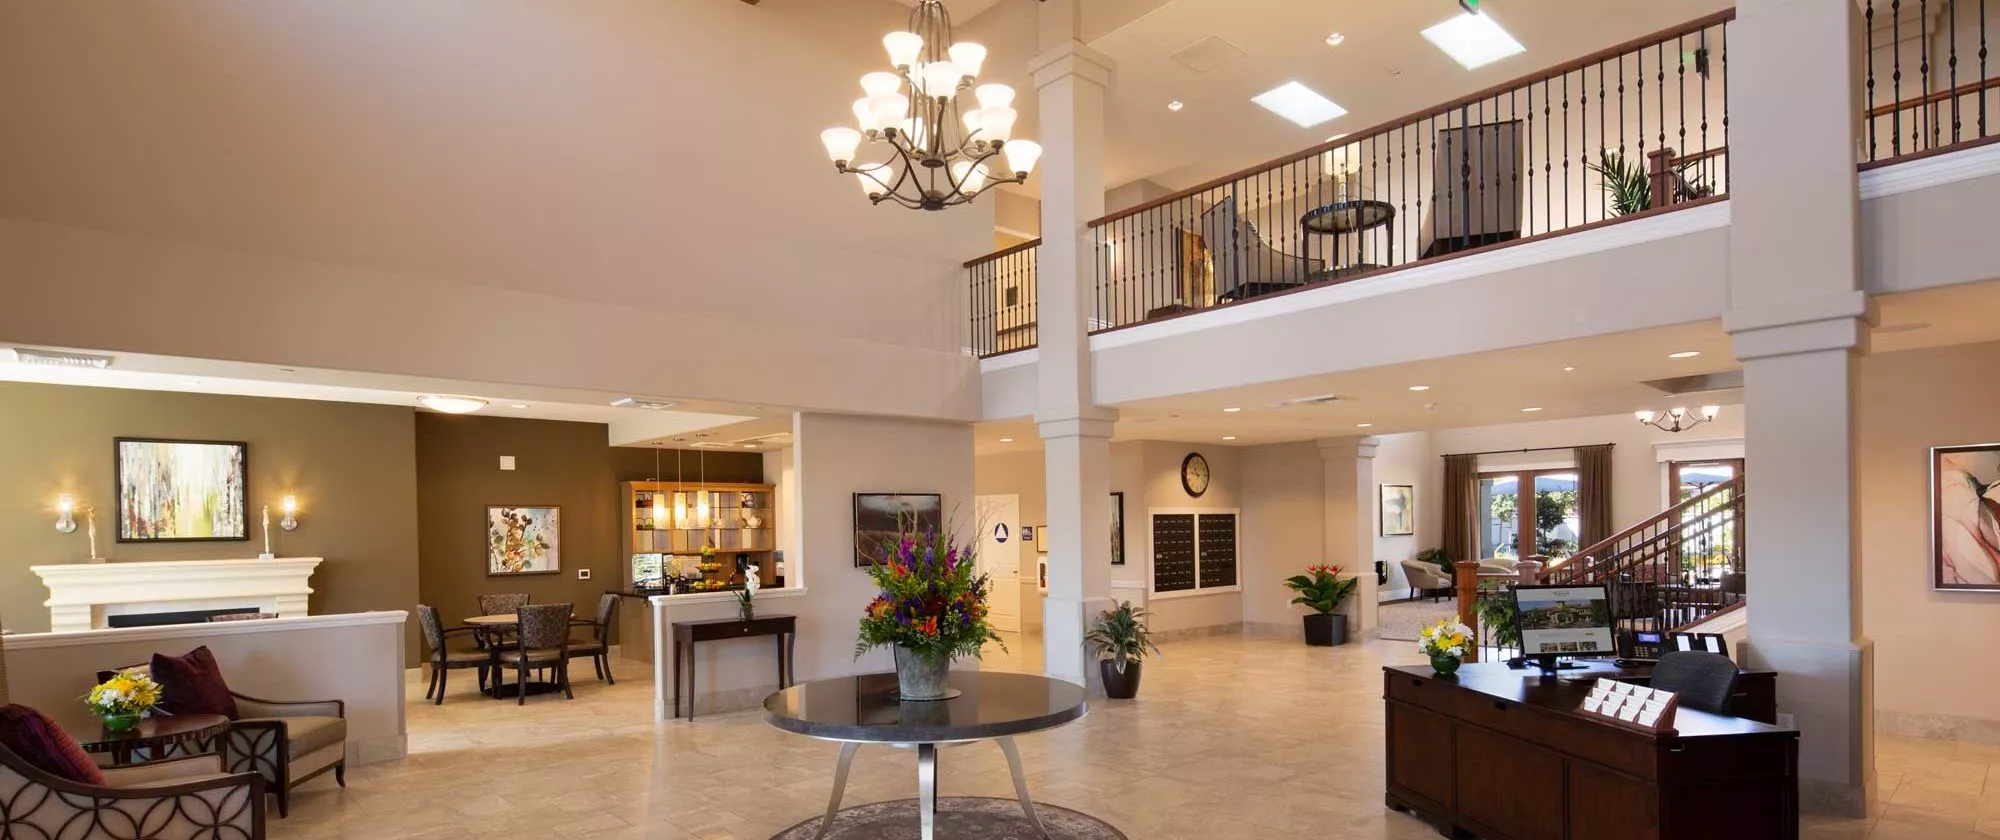 Fair Oaks entry hall with seating areas chandelier and a table with flowers